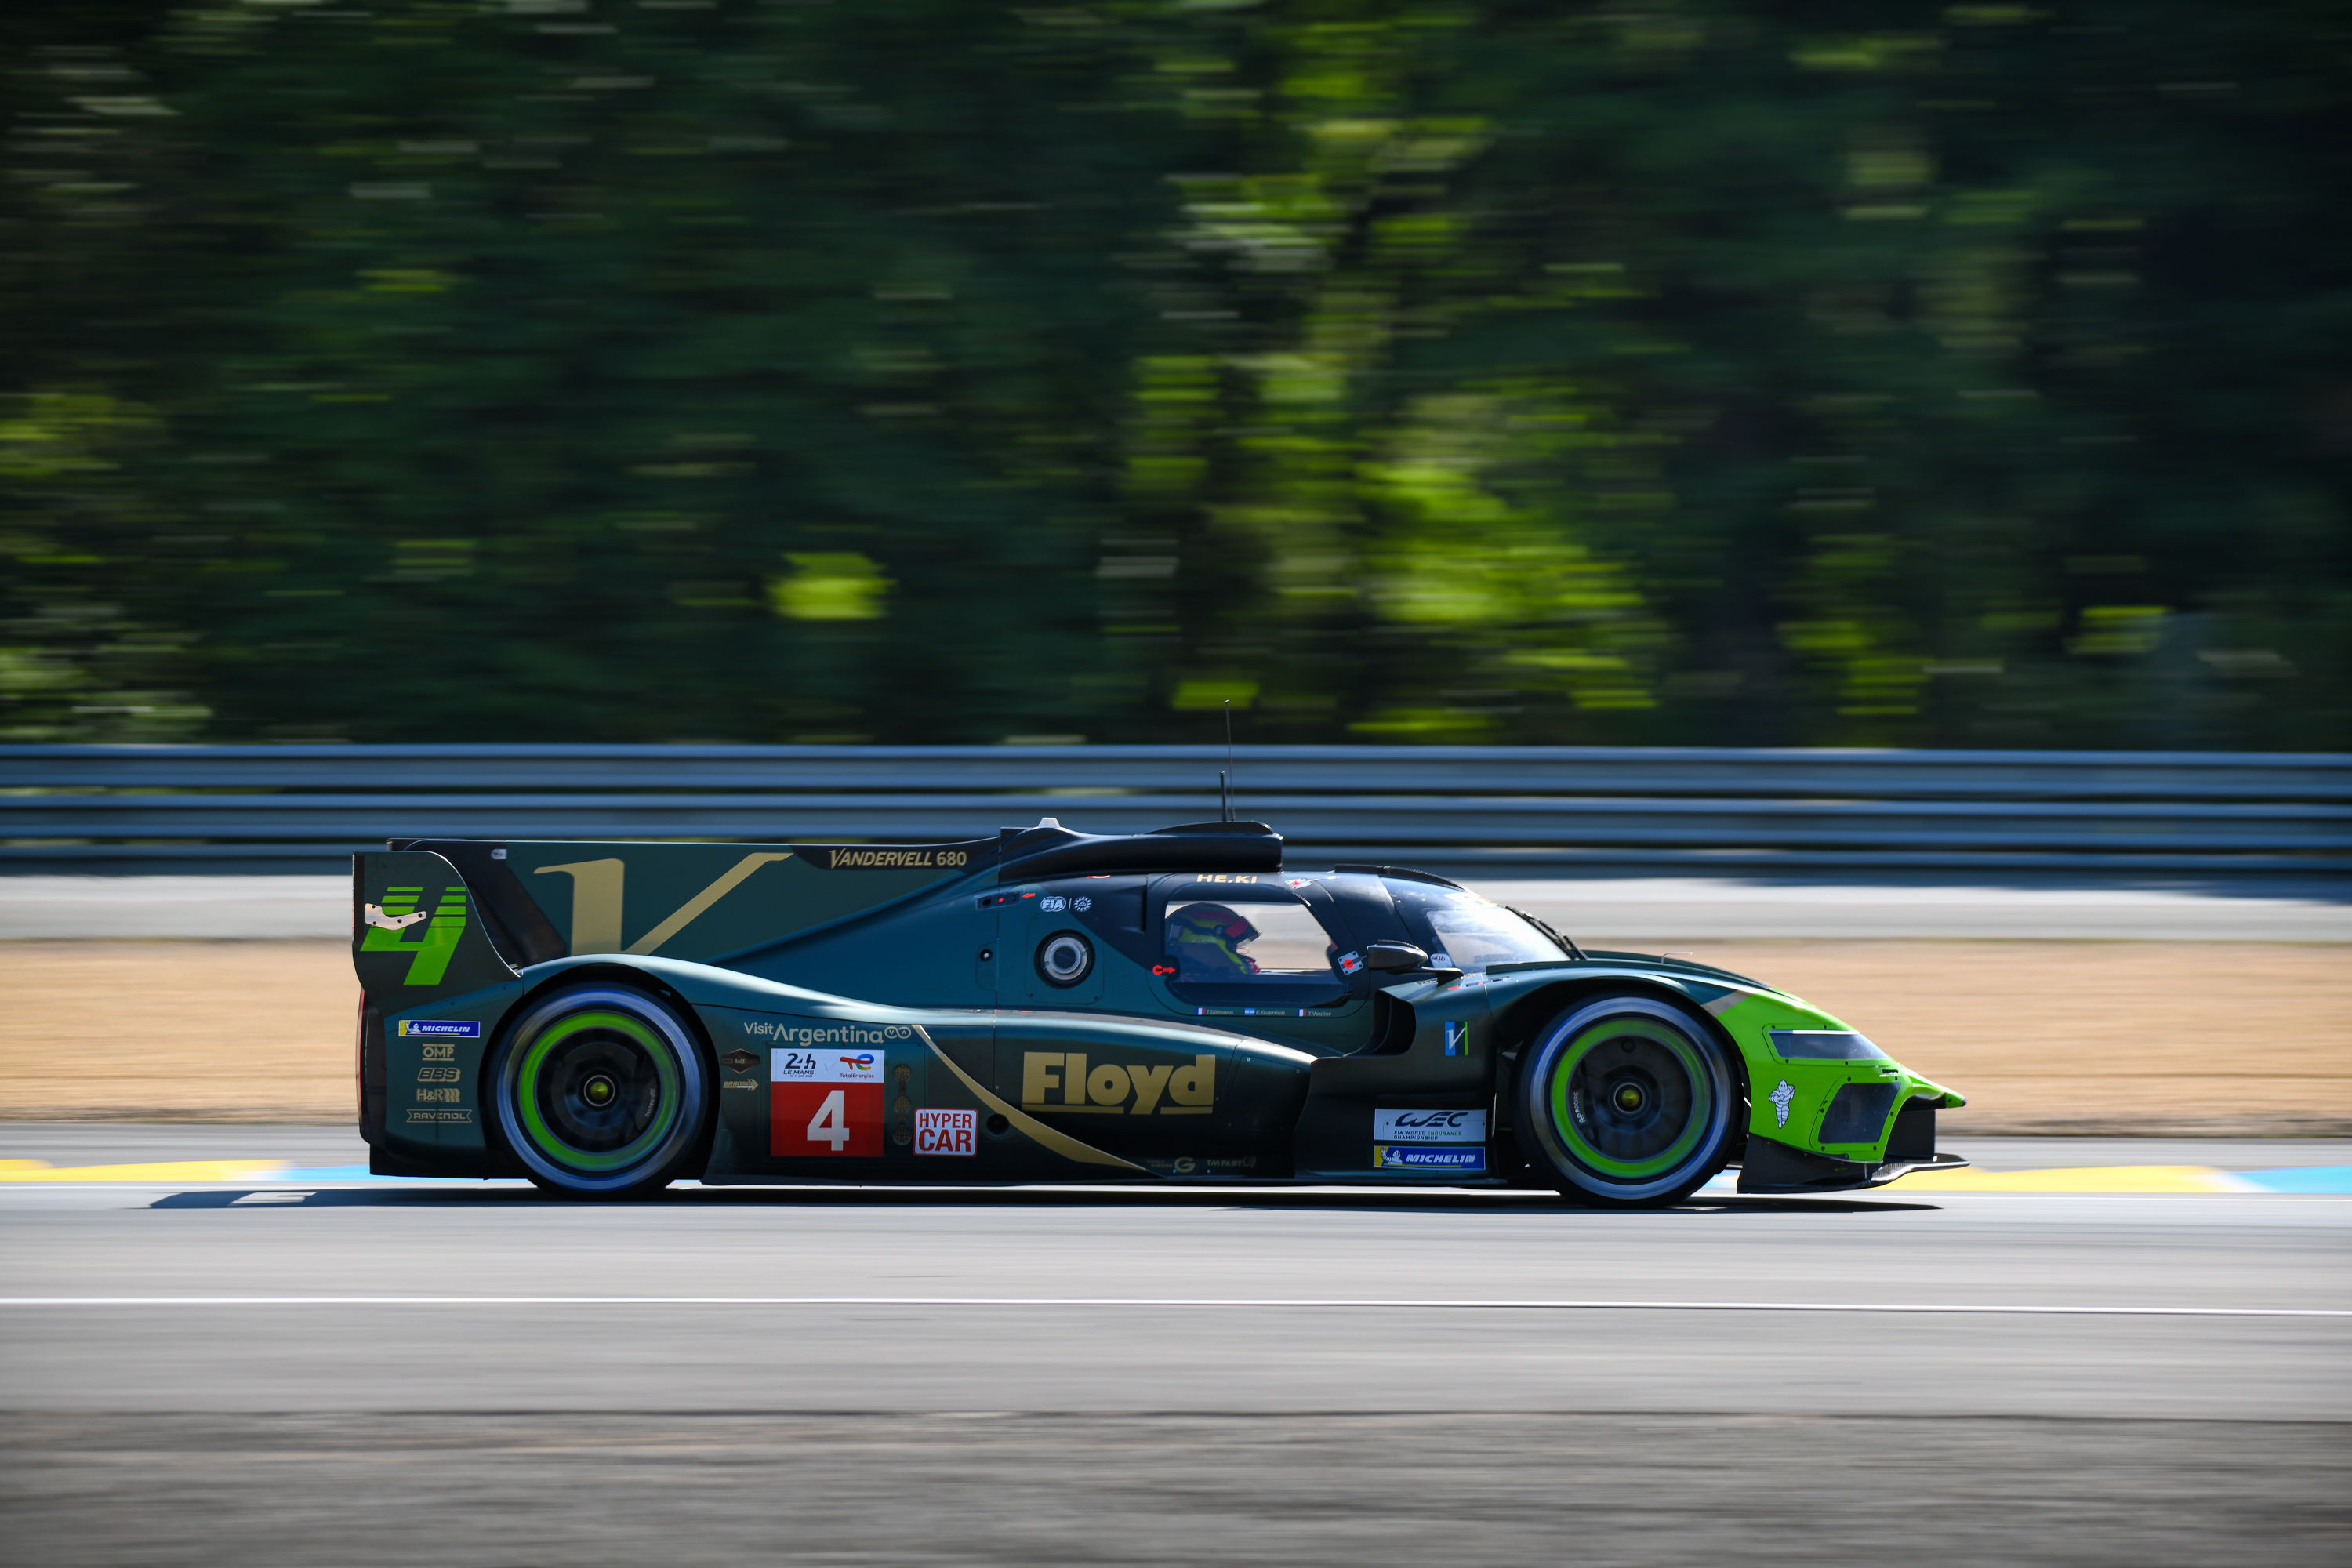 The Vanwall Vandervell 680 is quite simply unique, sharing its colours with the forest.